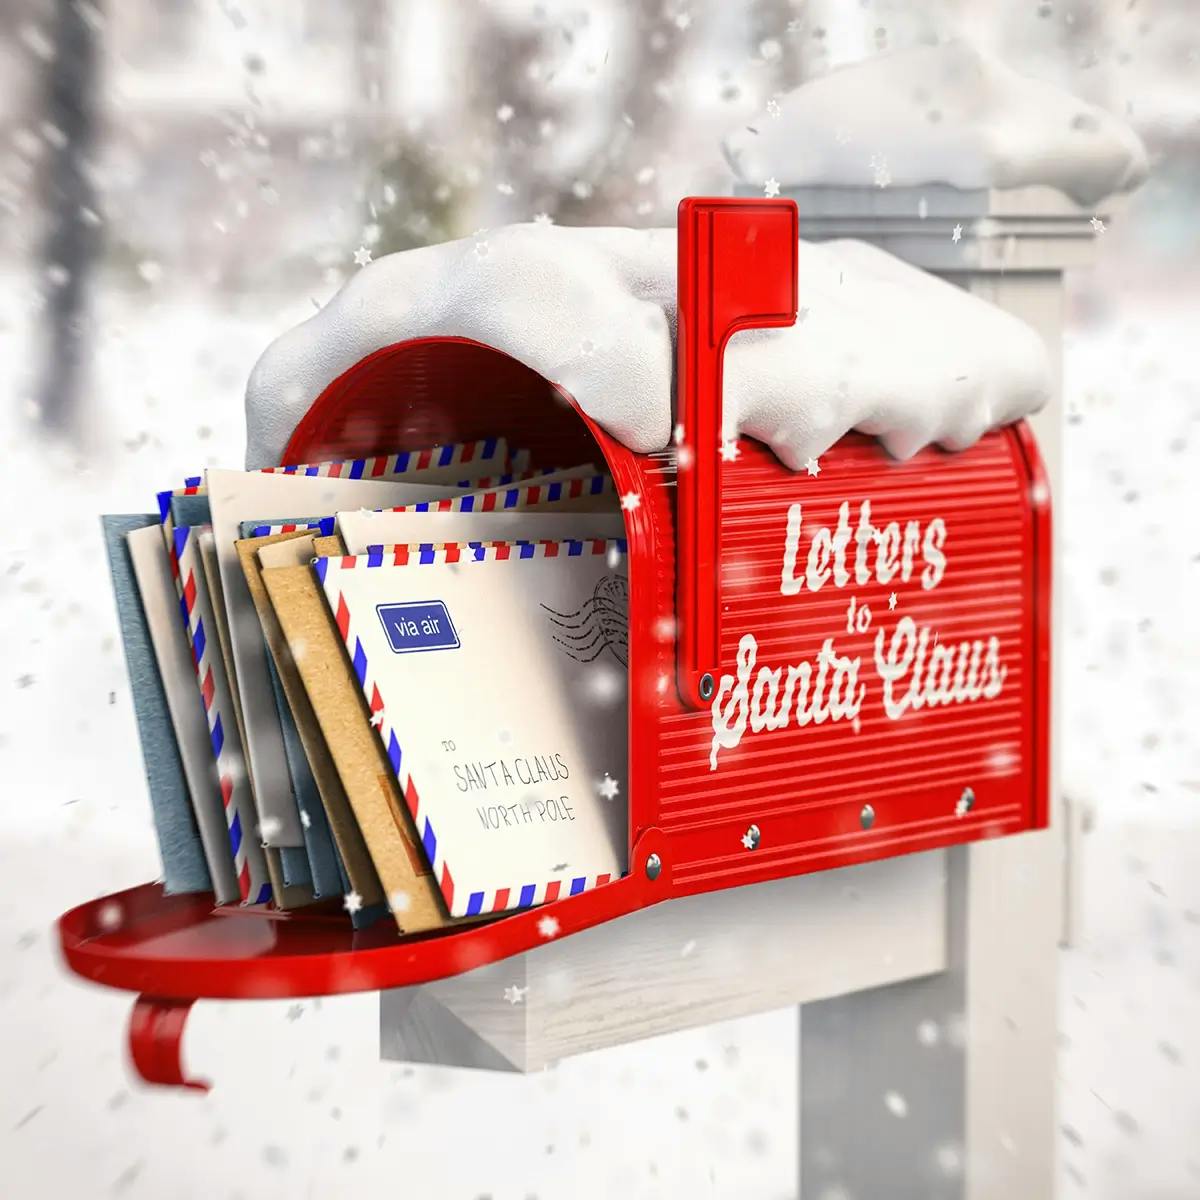 A red “Letters To Santa” mailbox with letters sticking out, surrounded by snow.